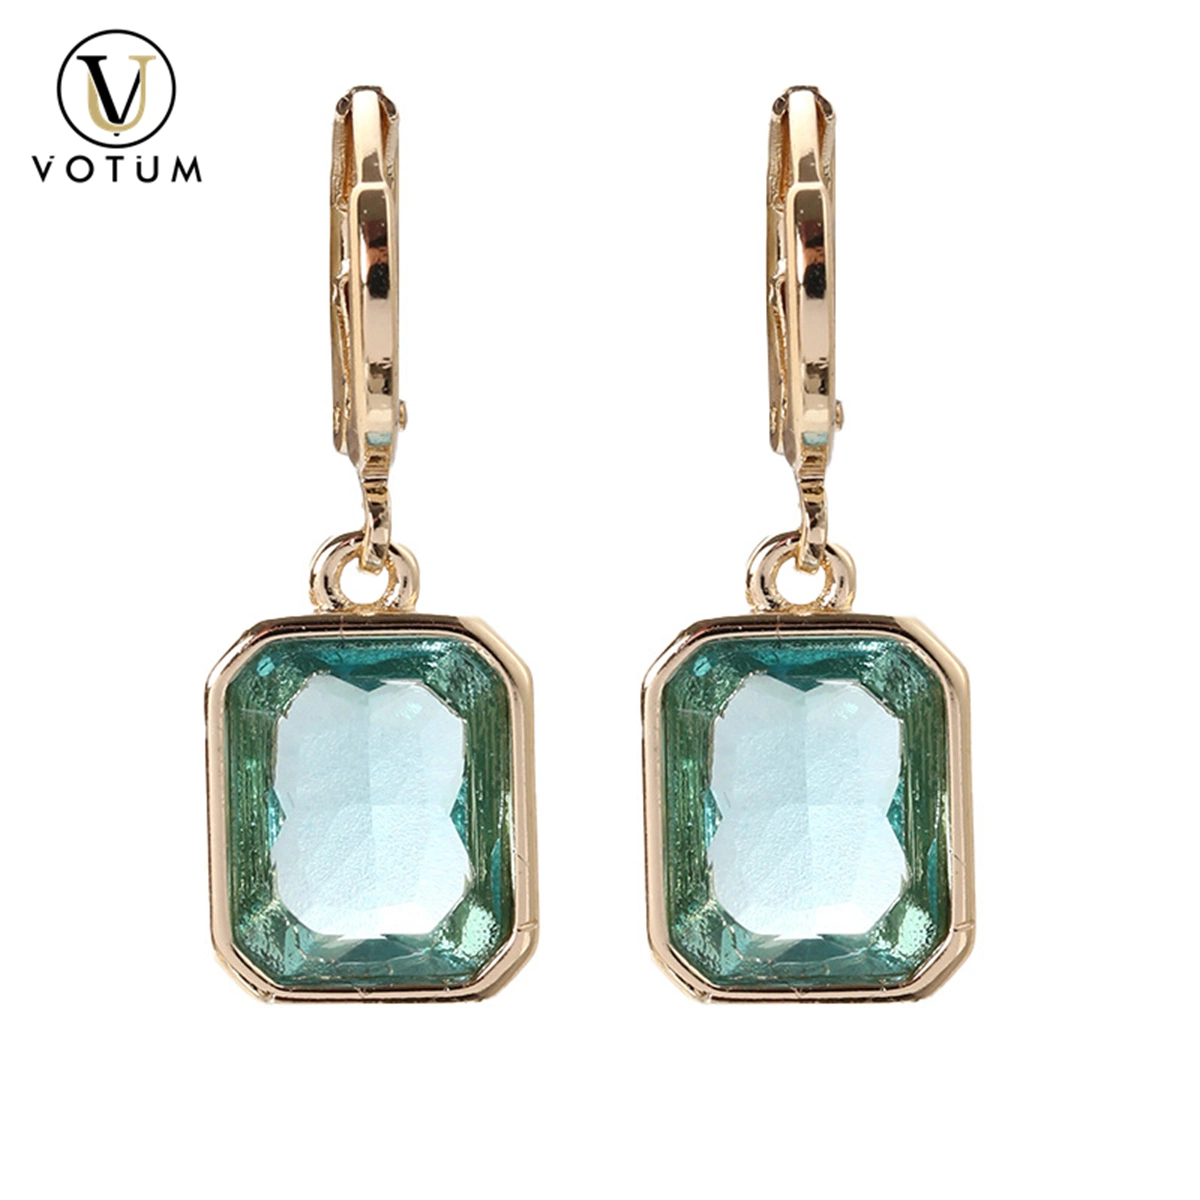 Votum OEM Gold Plated 925 Sterling Silver Natural Crystal Eardrop Earring for Women Classy Jewelry